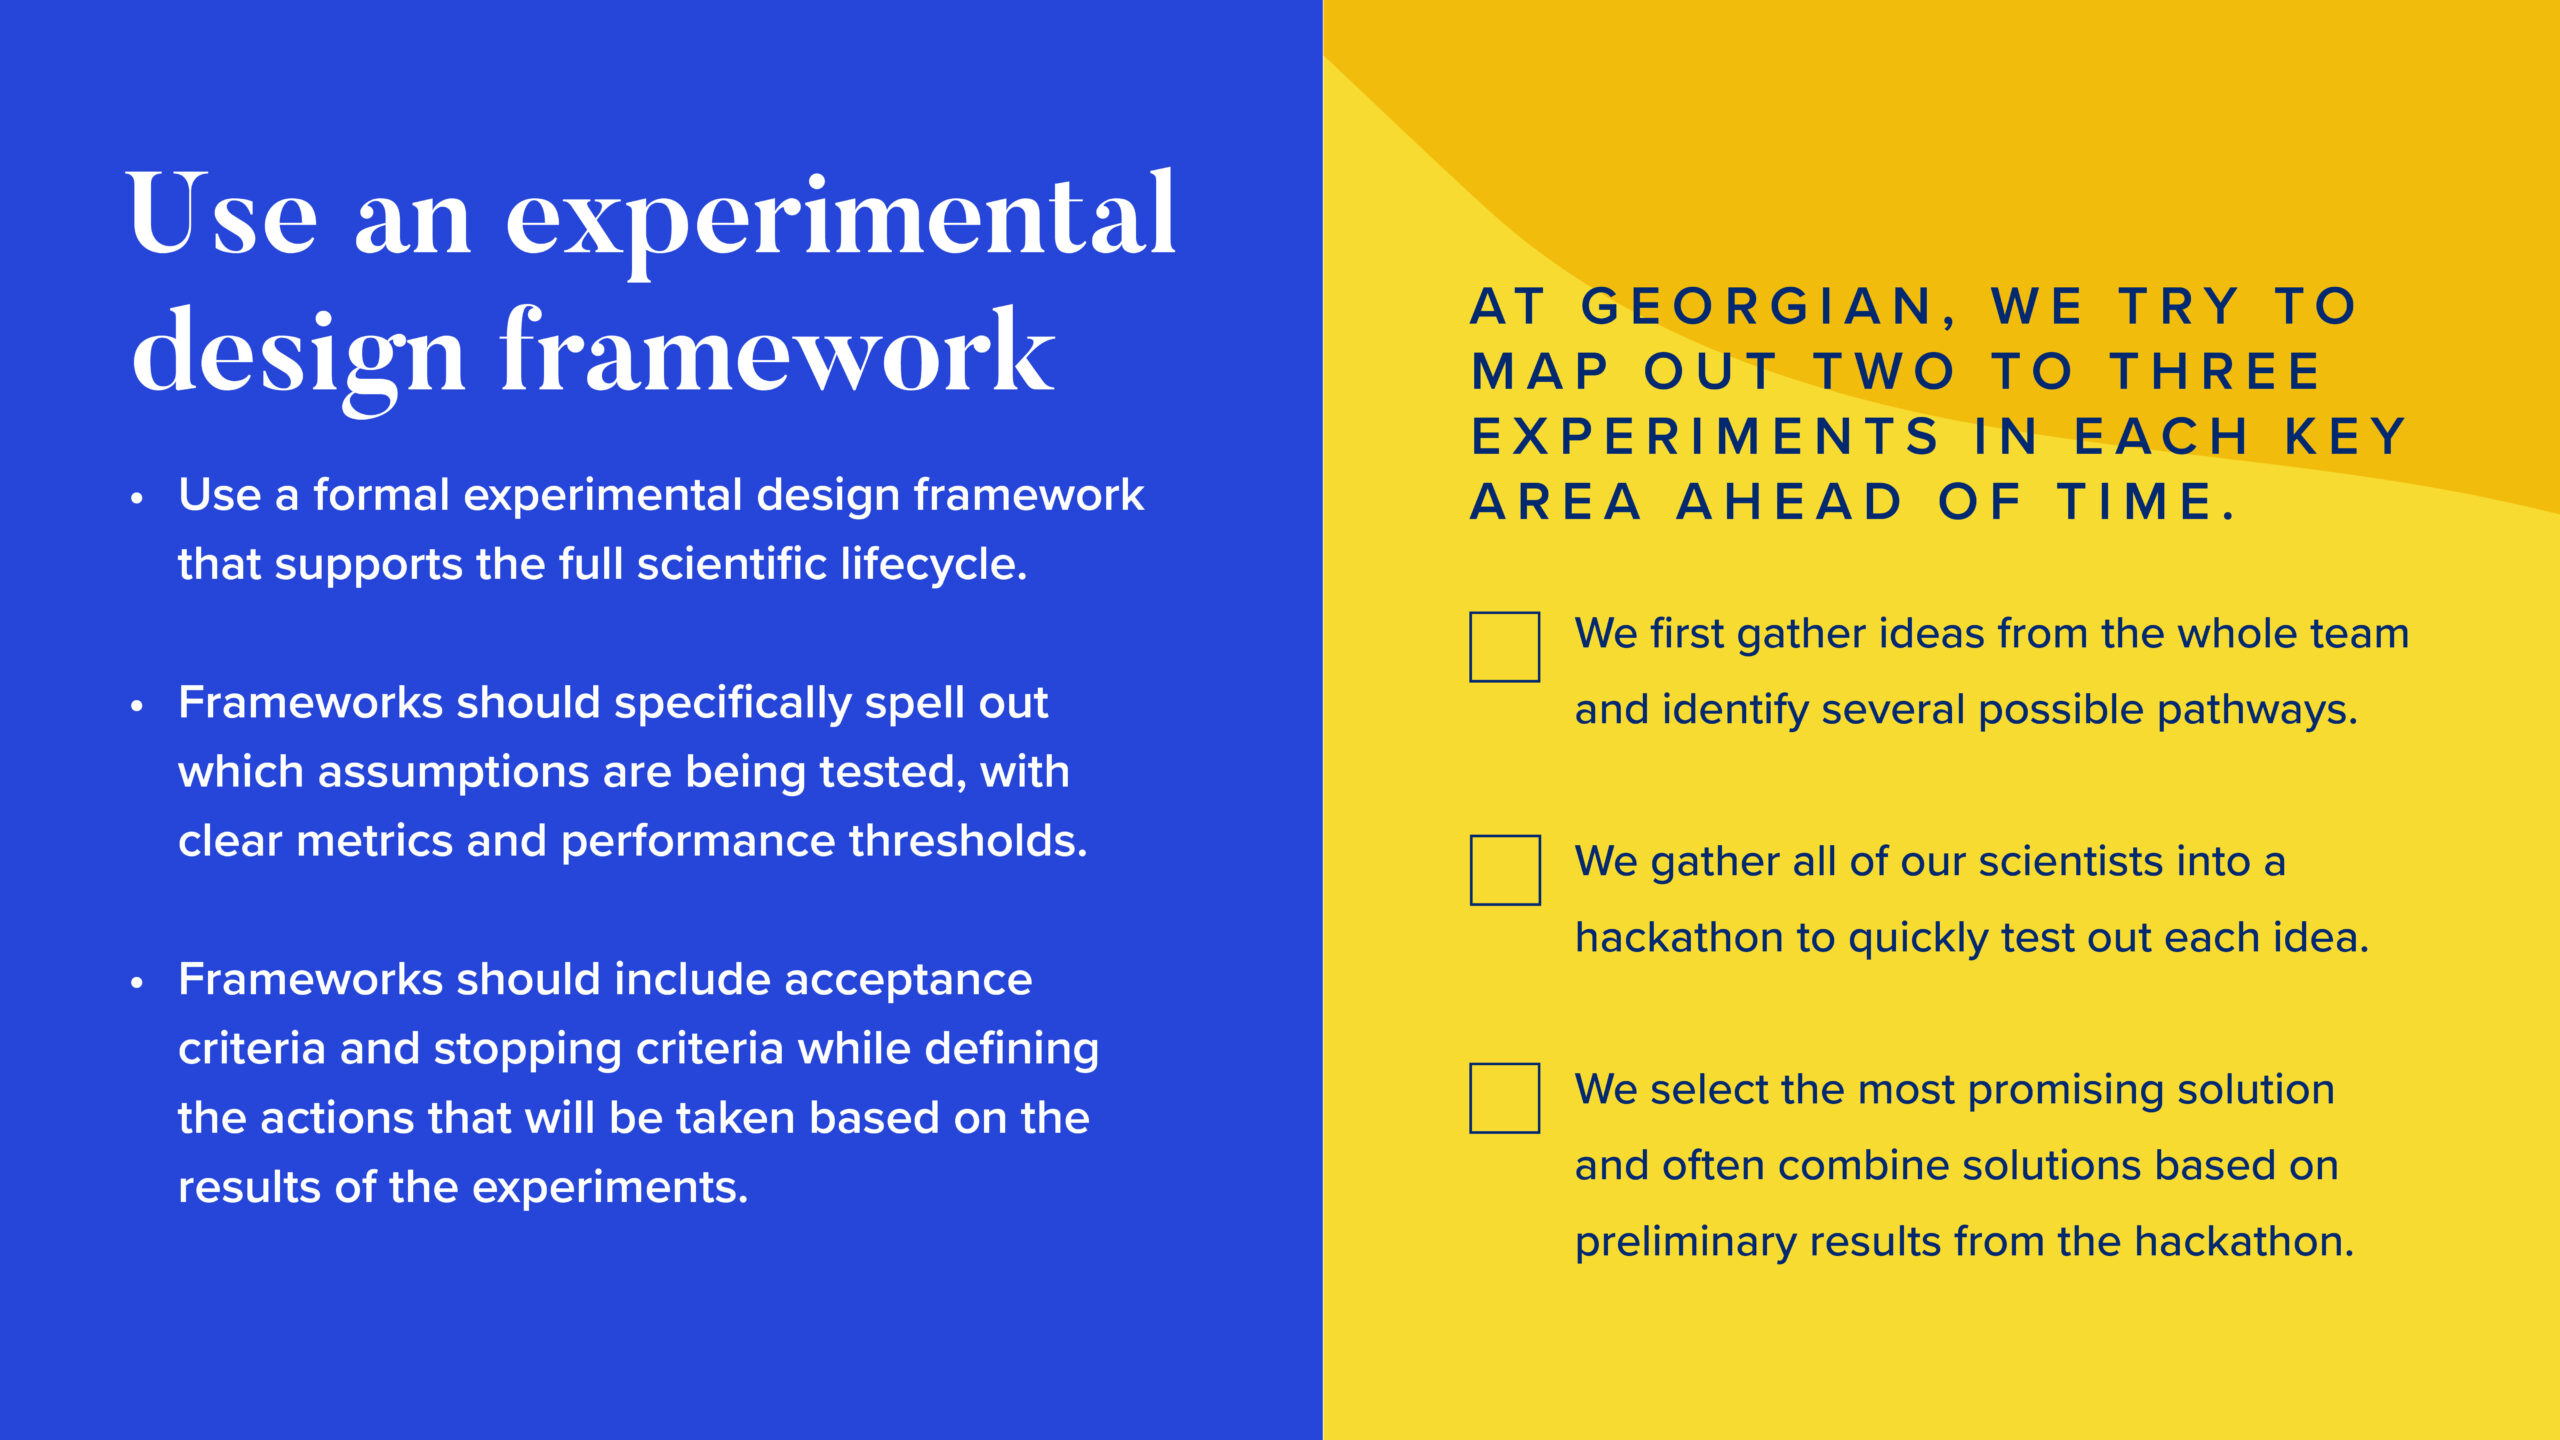 INFOGRAPHIC #2: Use an experimental design framework

Left side:

Use a formal experimental design framework that supports the full scientific lifecycle.
Frameworks should specifically spell out which assumptions are being tested, with clear metrics and performance thresholds.
Frameworks should include acceptance criteria and stopping criteria, while defining the actions that will be taken based on the results of the experiments. 

Right side

At Georgian, we try to map out two to three experiments in each key area ahead of time.

We first gather ideas from the whole team and identify several possible pathways.
We gather all of our scientists into a hackathon to quickly test out each idea. 
We select the most promising solution and often combine solutions based on preliminary results from the hackathon.
